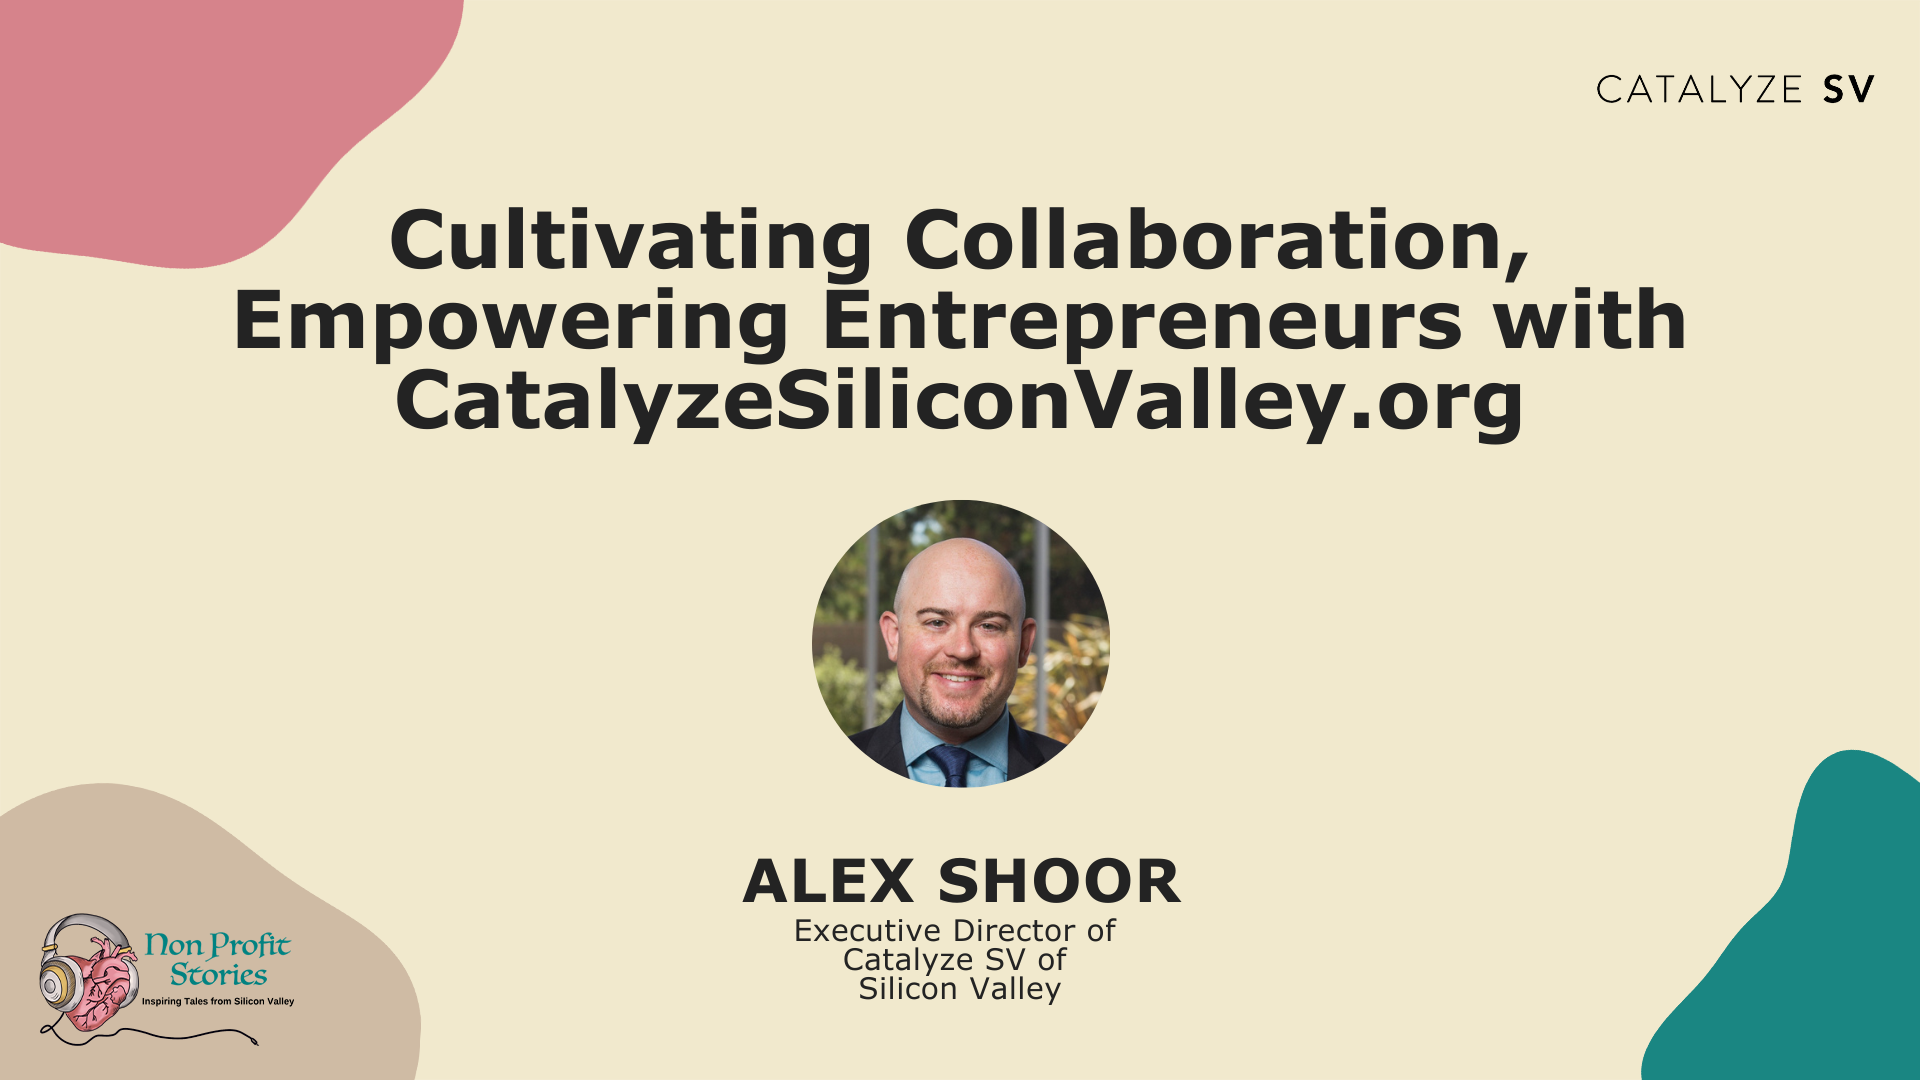 Cultivating Collaboration, Empowering Entrepreneurs with Catalyze Silicon Valley